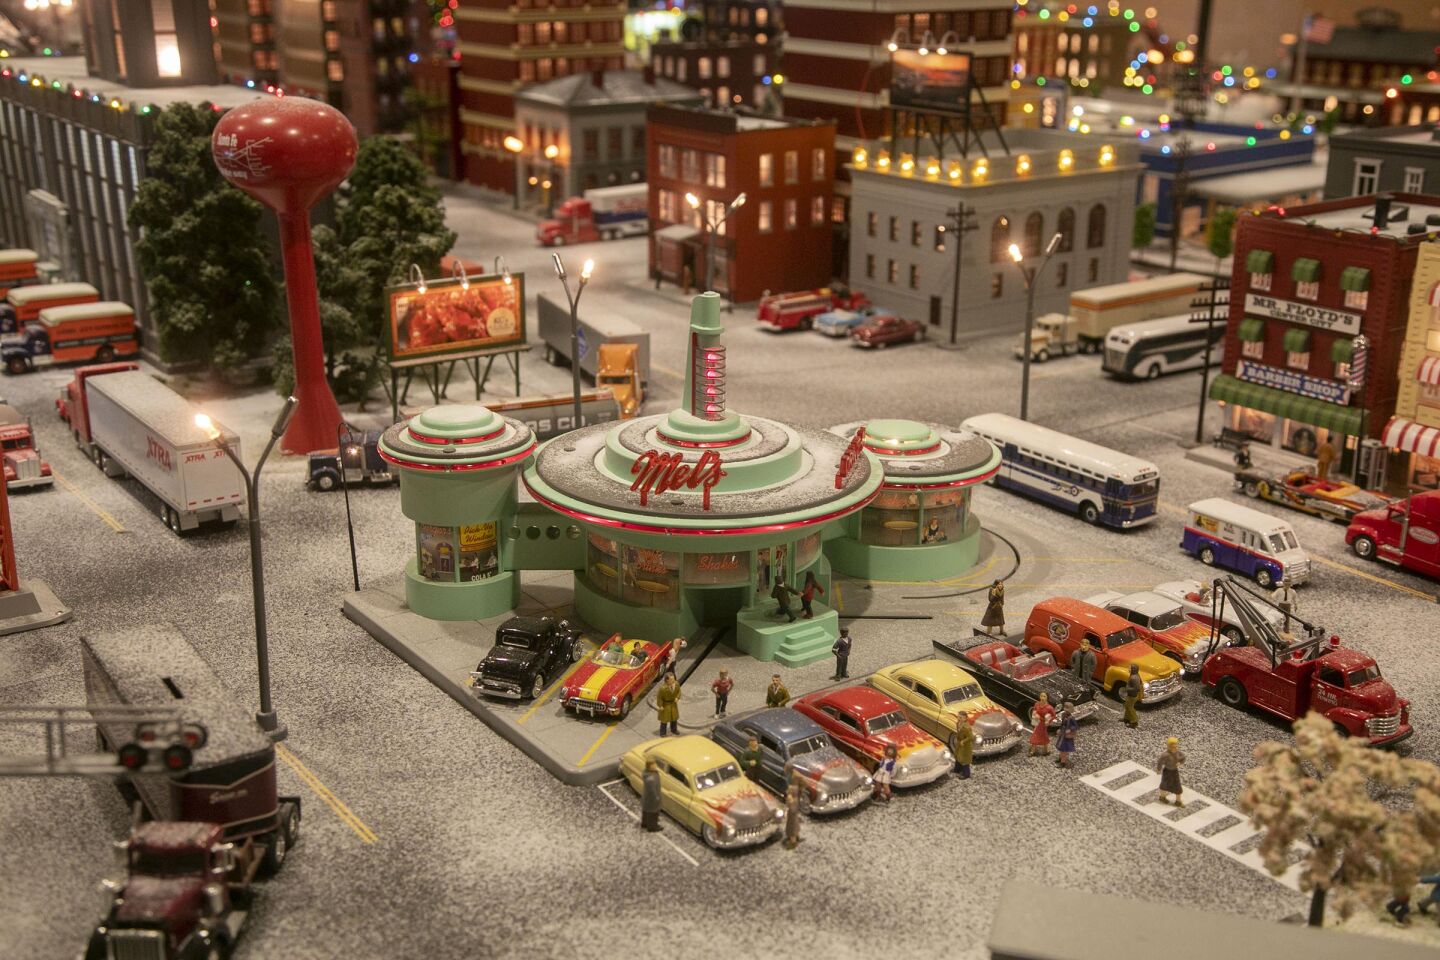 David Lizerbram and his wife Mana Monzavi took over the Old Town Model Railroad Depot, which was in danger of closing. The extensive train layout and its detailed and sometimes humorous dioramas was photographed on Friday, Dec. 13, 2019, at its Old Town, San Diego location. Mel's Diner is rockin'.